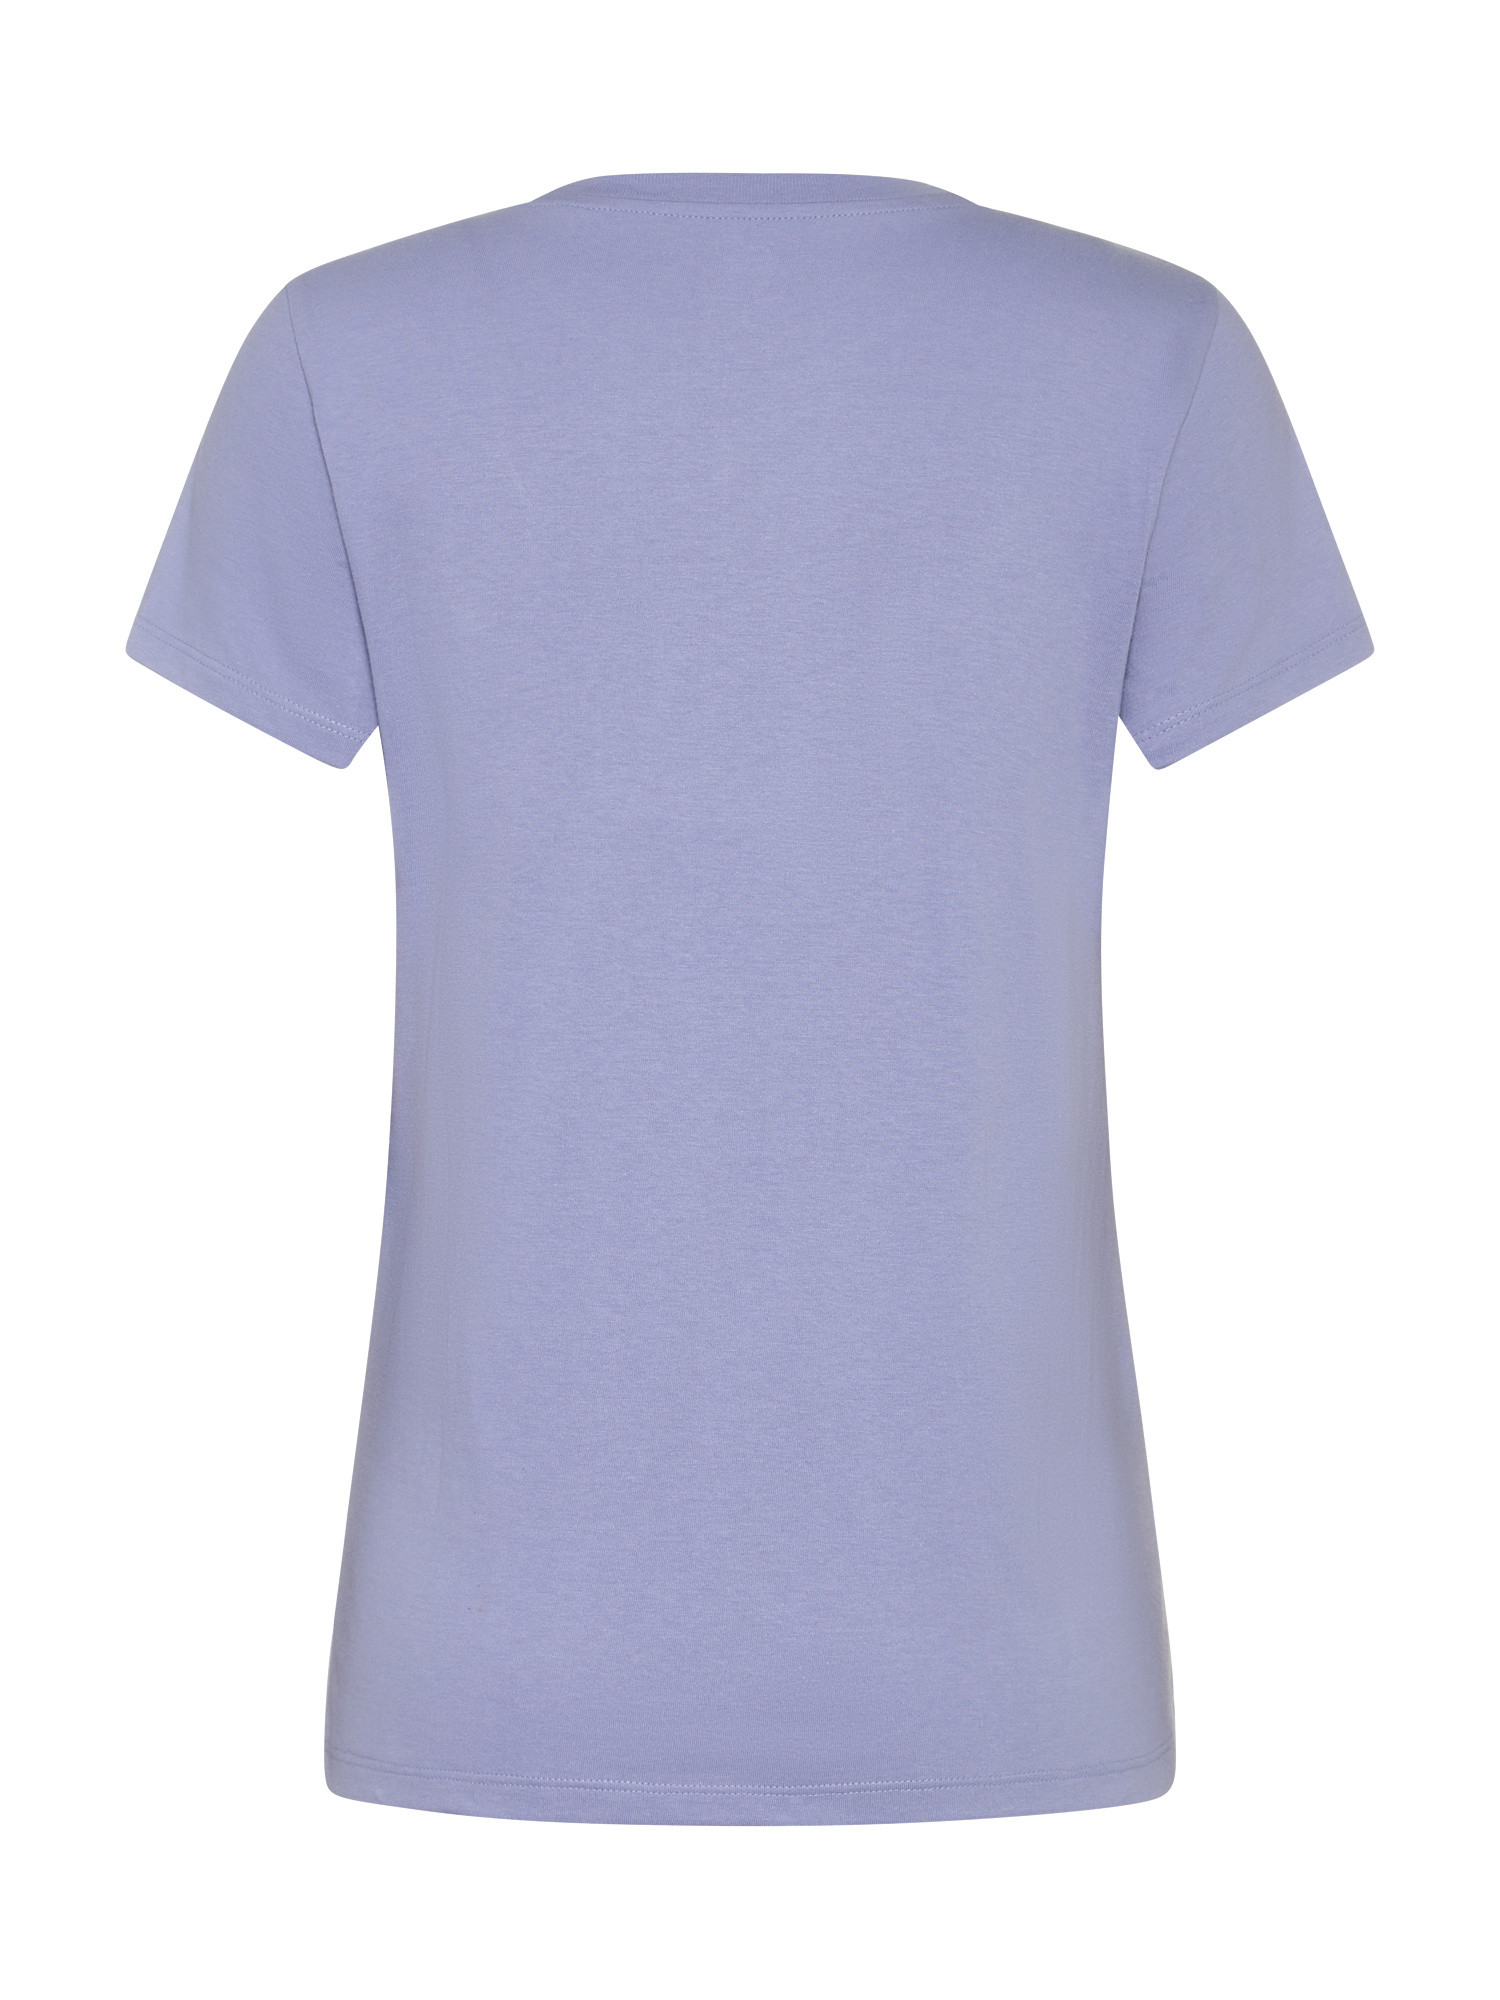 Levi's - T-shirt in cotone con logo, Viola, large image number 1